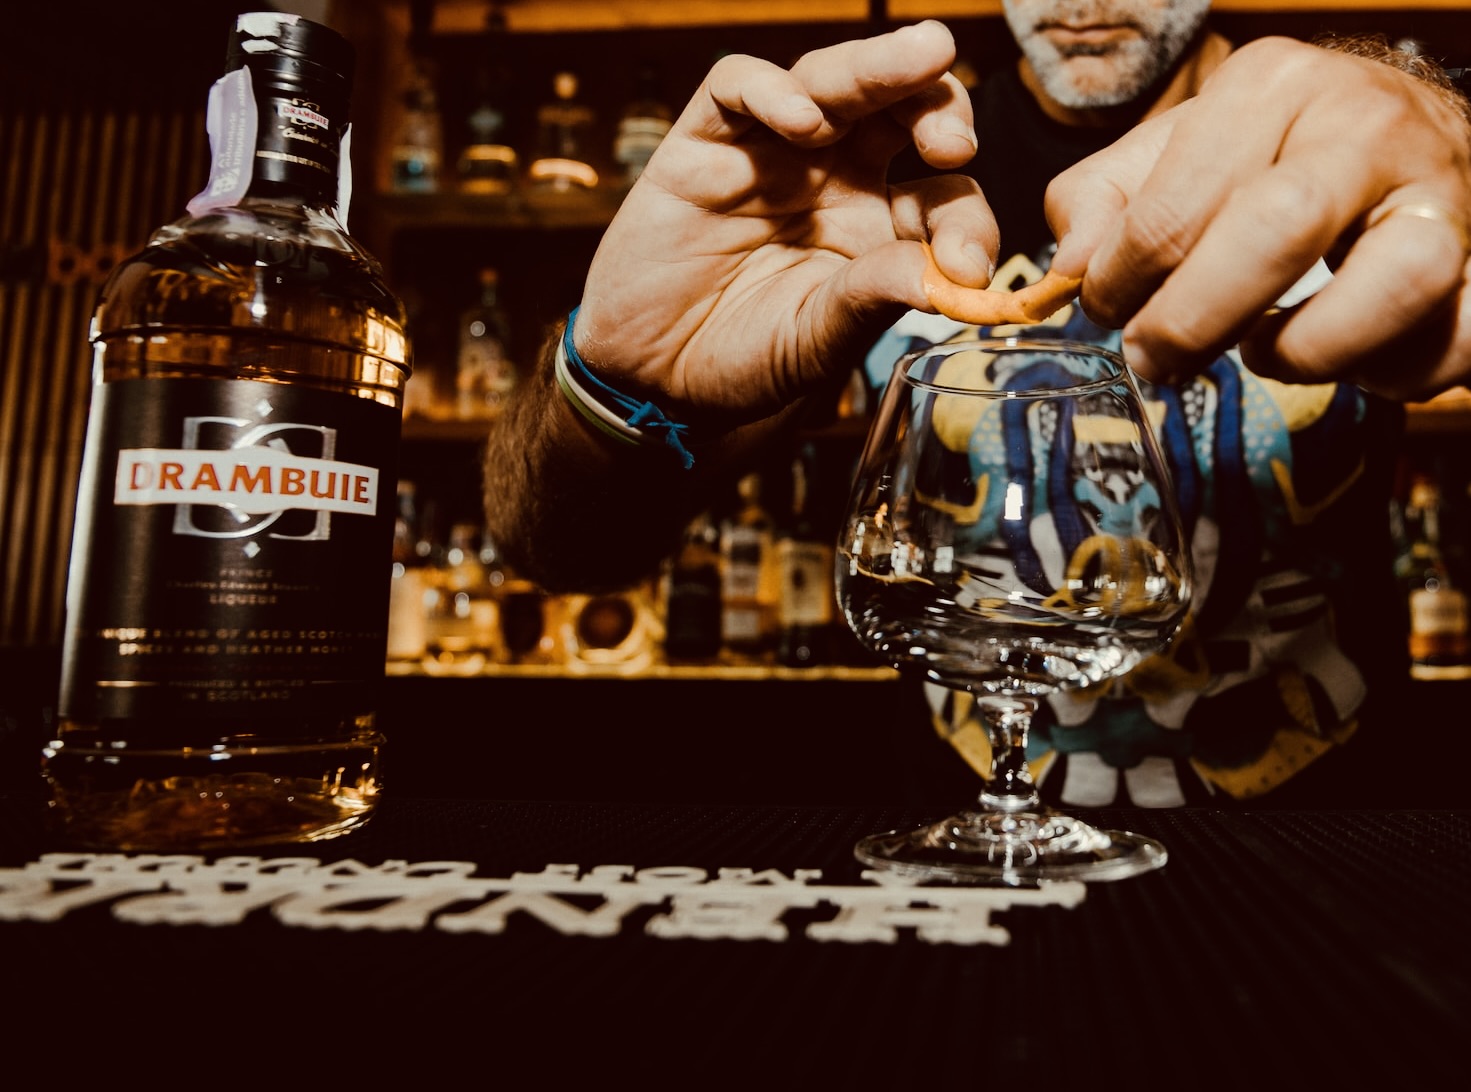 A bottle of Drambuie sits on a bar next to a man releasing oil from an orange peel into a glass 